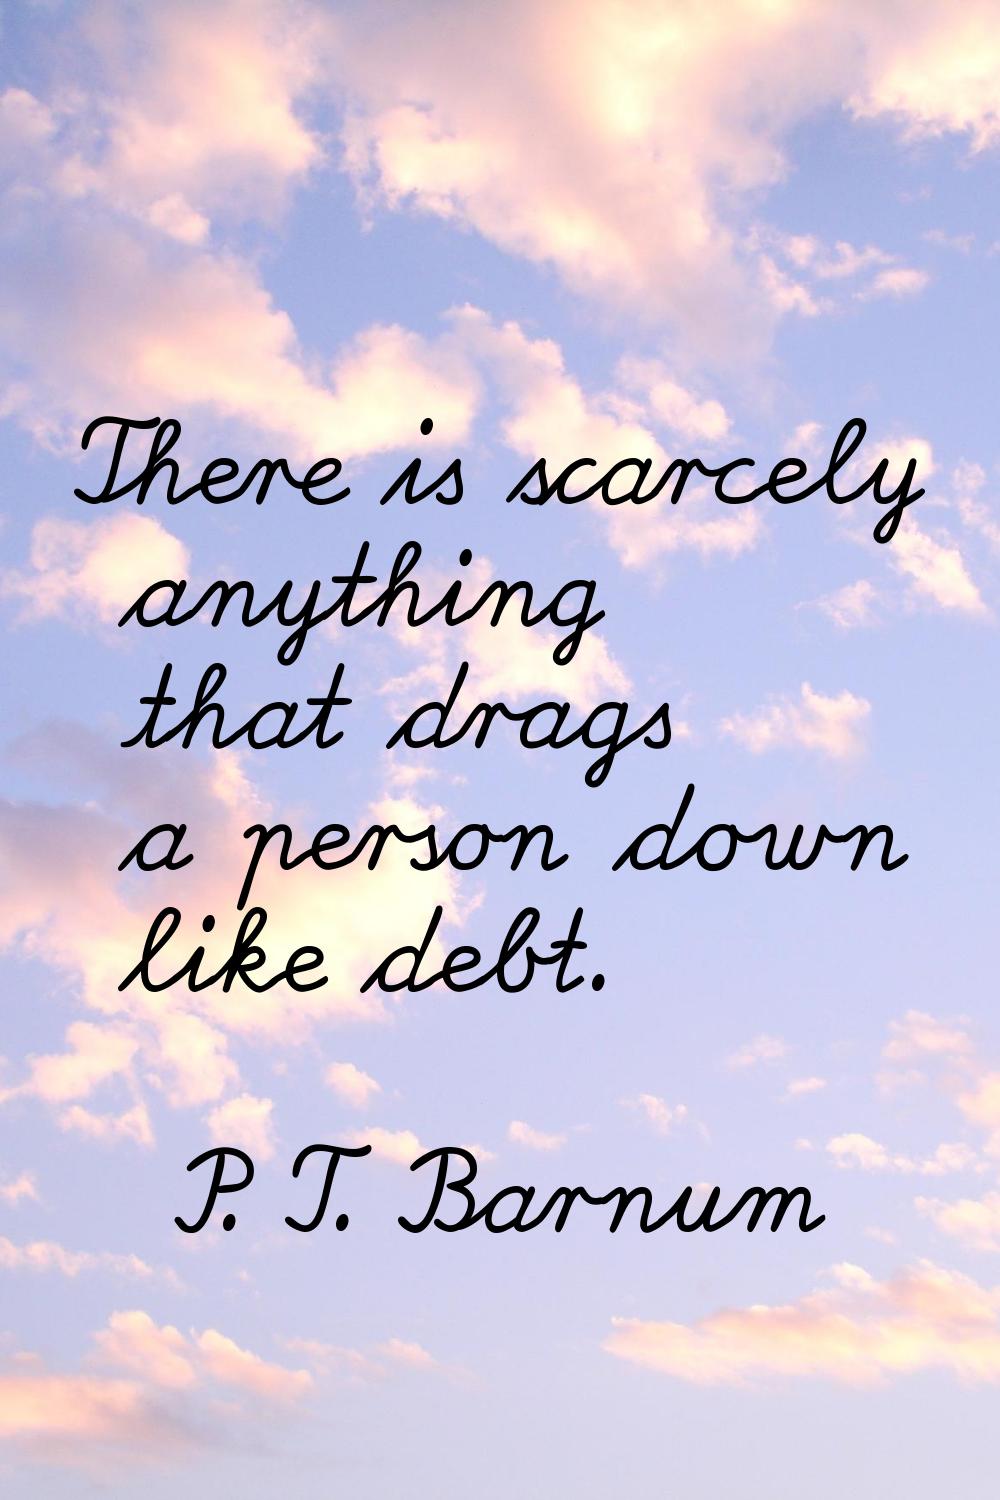 There is scarcely anything that drags a person down like debt.